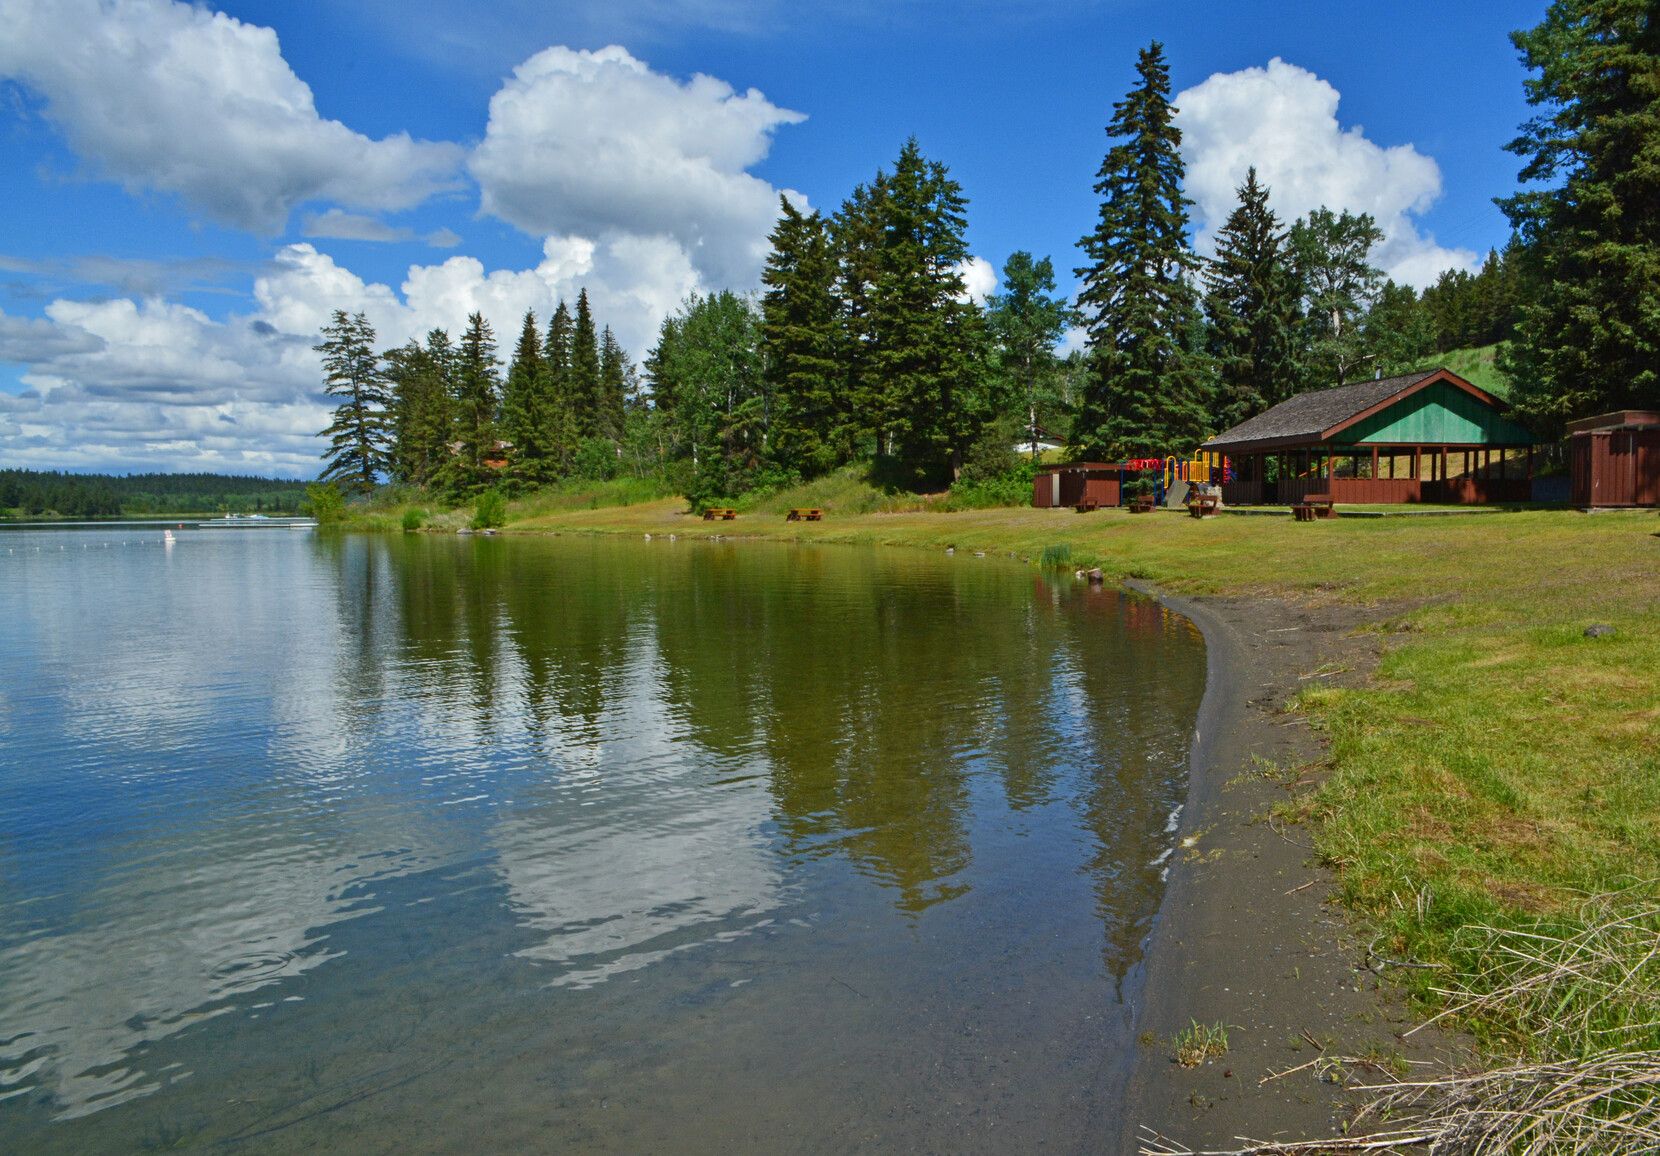 Day-use area of Lac La Hache Park includes a picnic shelter, tables by the shore, and a playground.